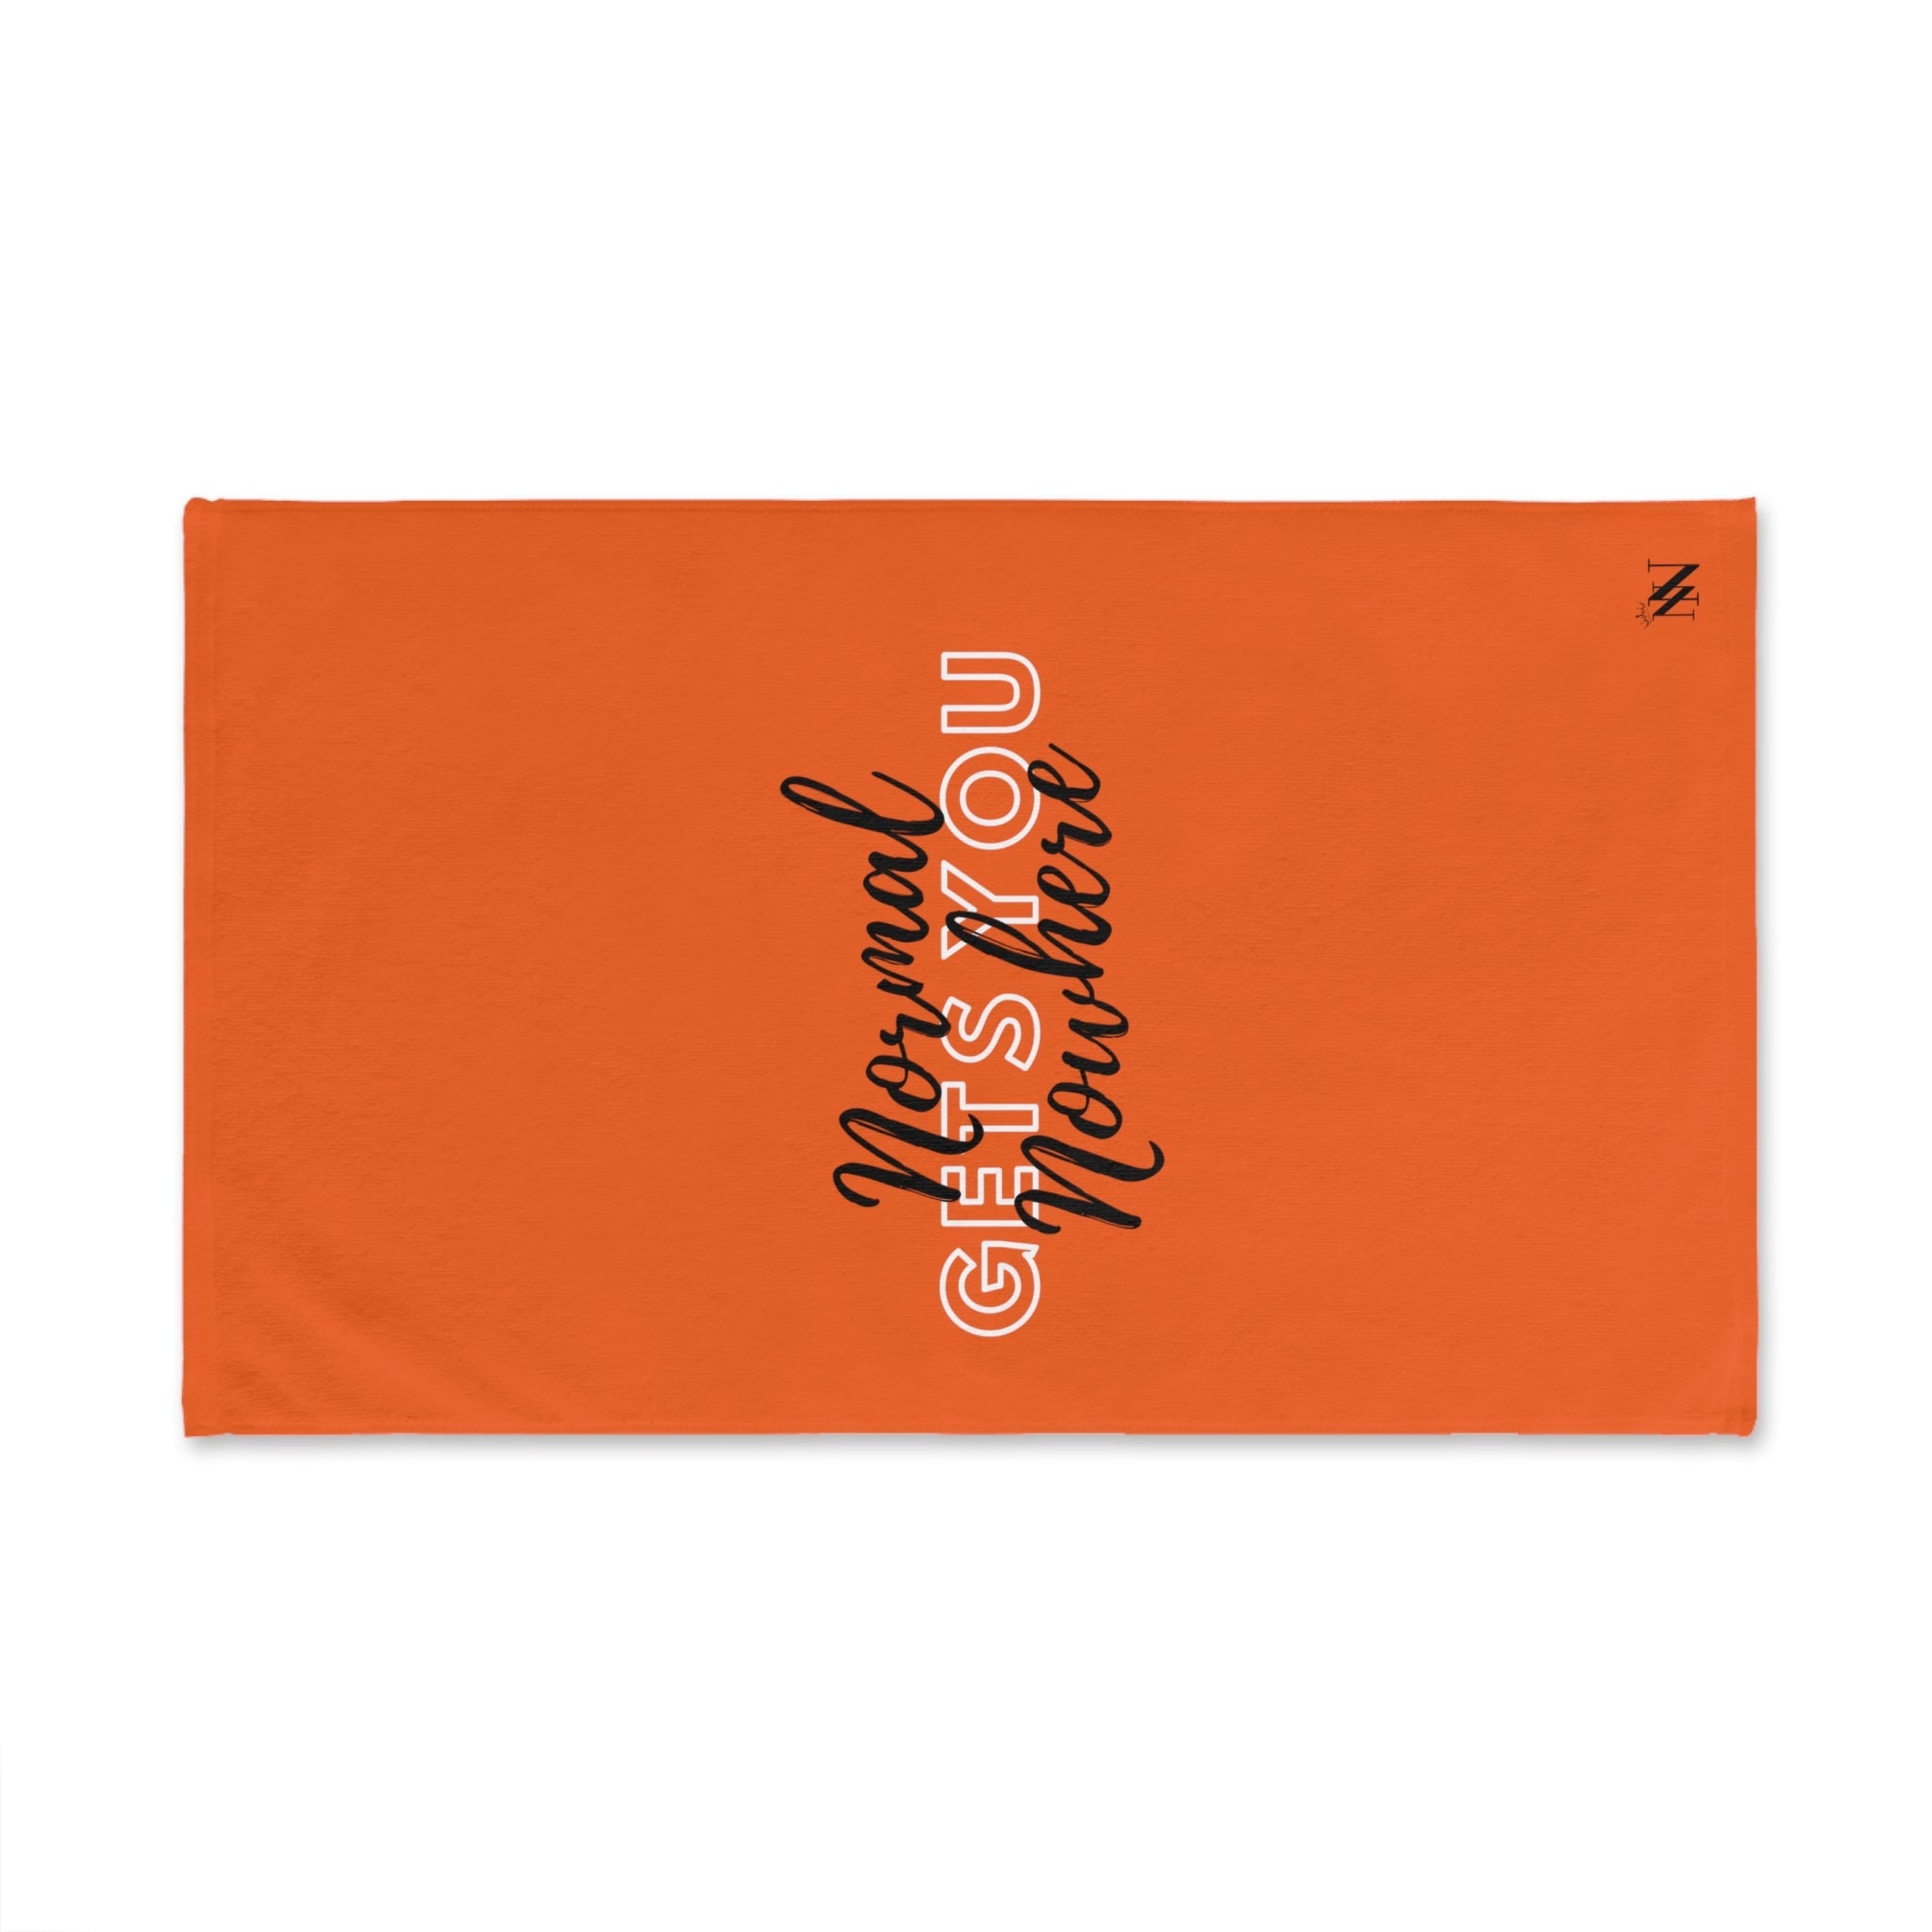 Normal Nowhere Orange | Funny Gifts for Men - Gifts for Him - Birthday Gifts for Men, Him, Husband, Boyfriend, New Couple Gifts, Fathers & Valentines Day Gifts, Hand Towels NECTAR NAPKINS